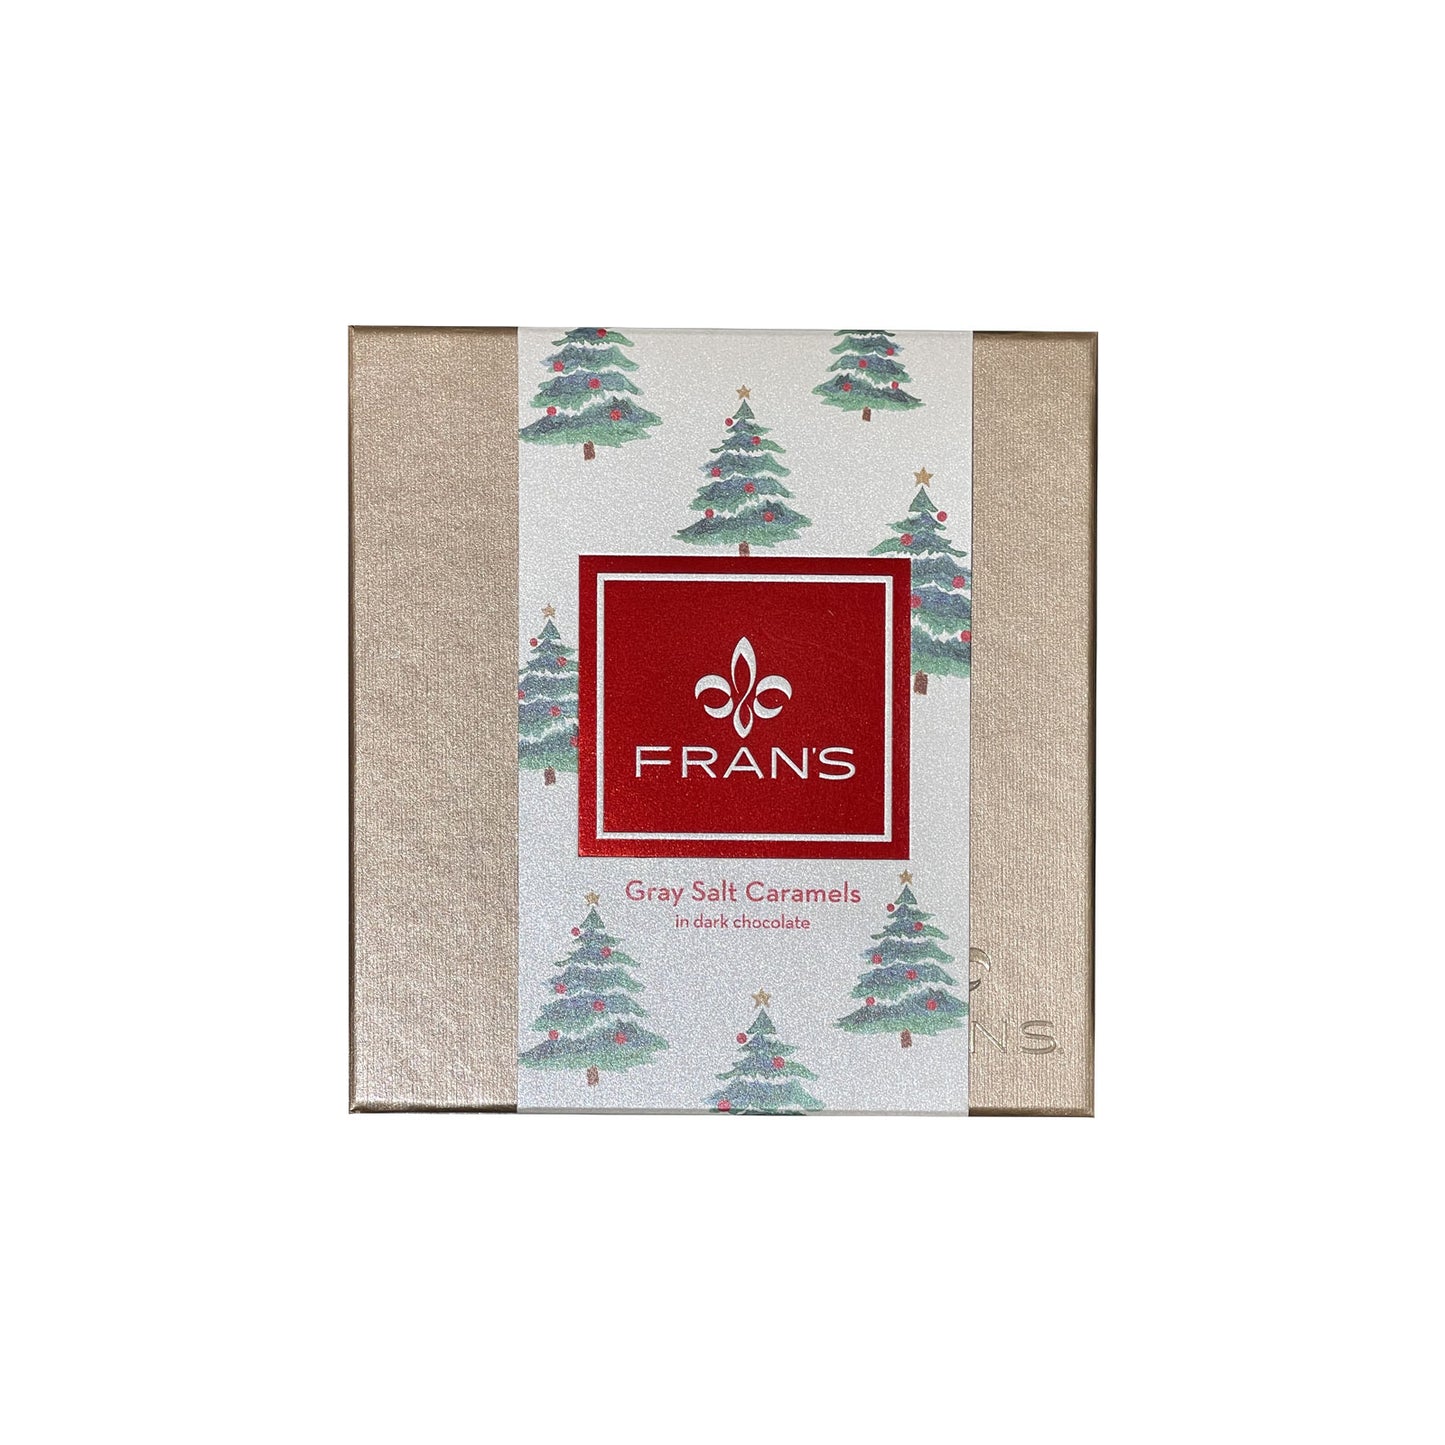 Gray Salt Caramels Gift Box, 20pc. By Fran's with Holiday Wrap